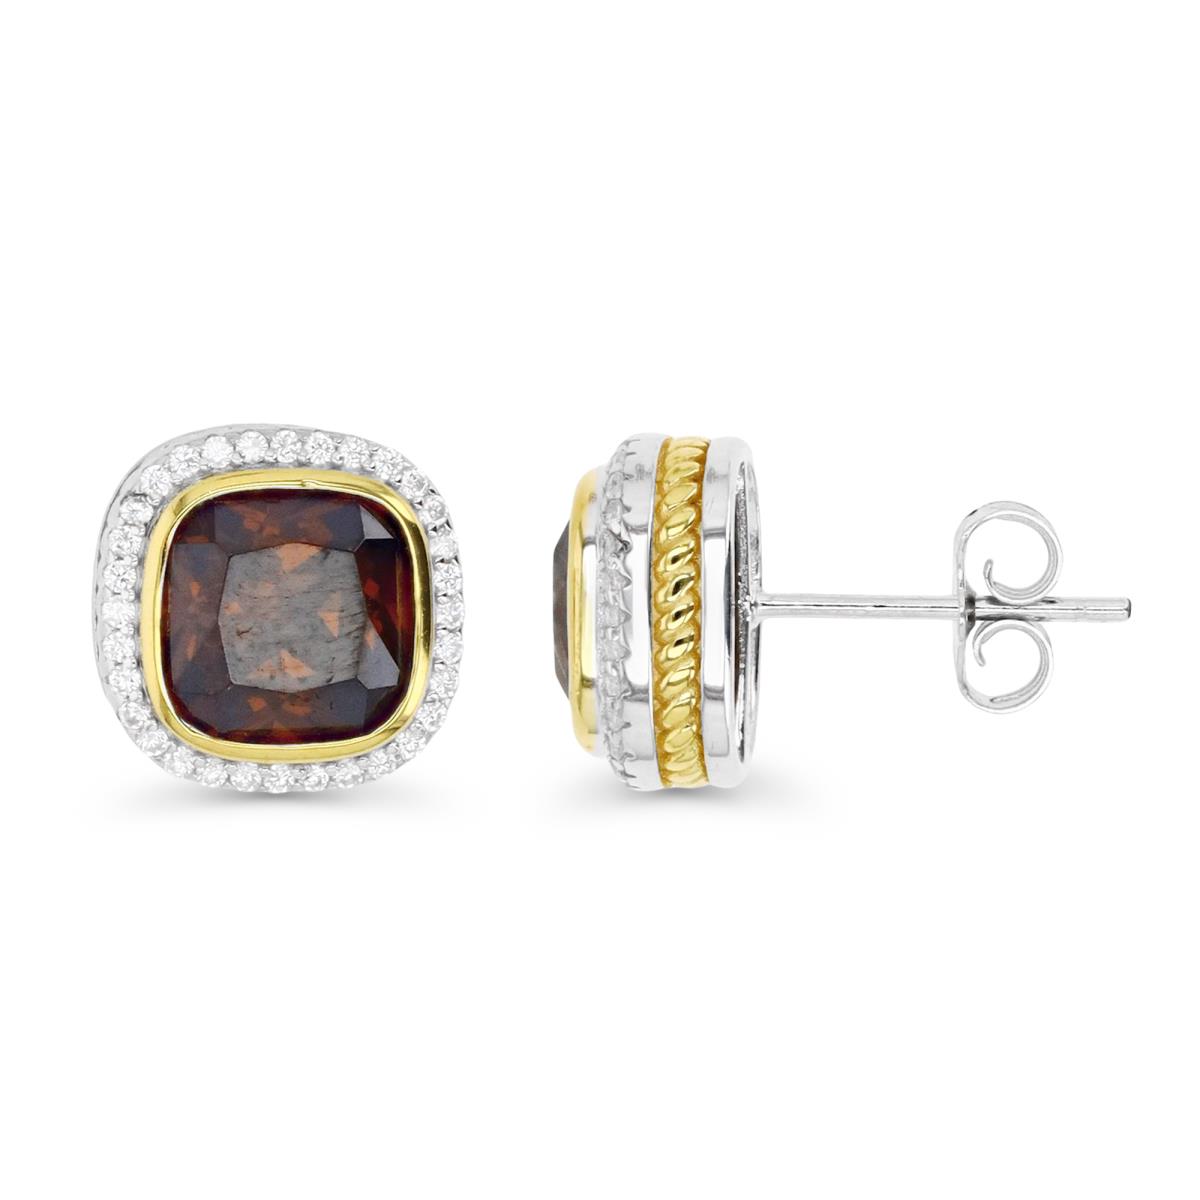 Sterling Silver Rhodium and Yellow 1M  & 8MM CU Ct. Bezel Set Smoky CZ and RD Ct. Pave White CZ Halo Stud Earring